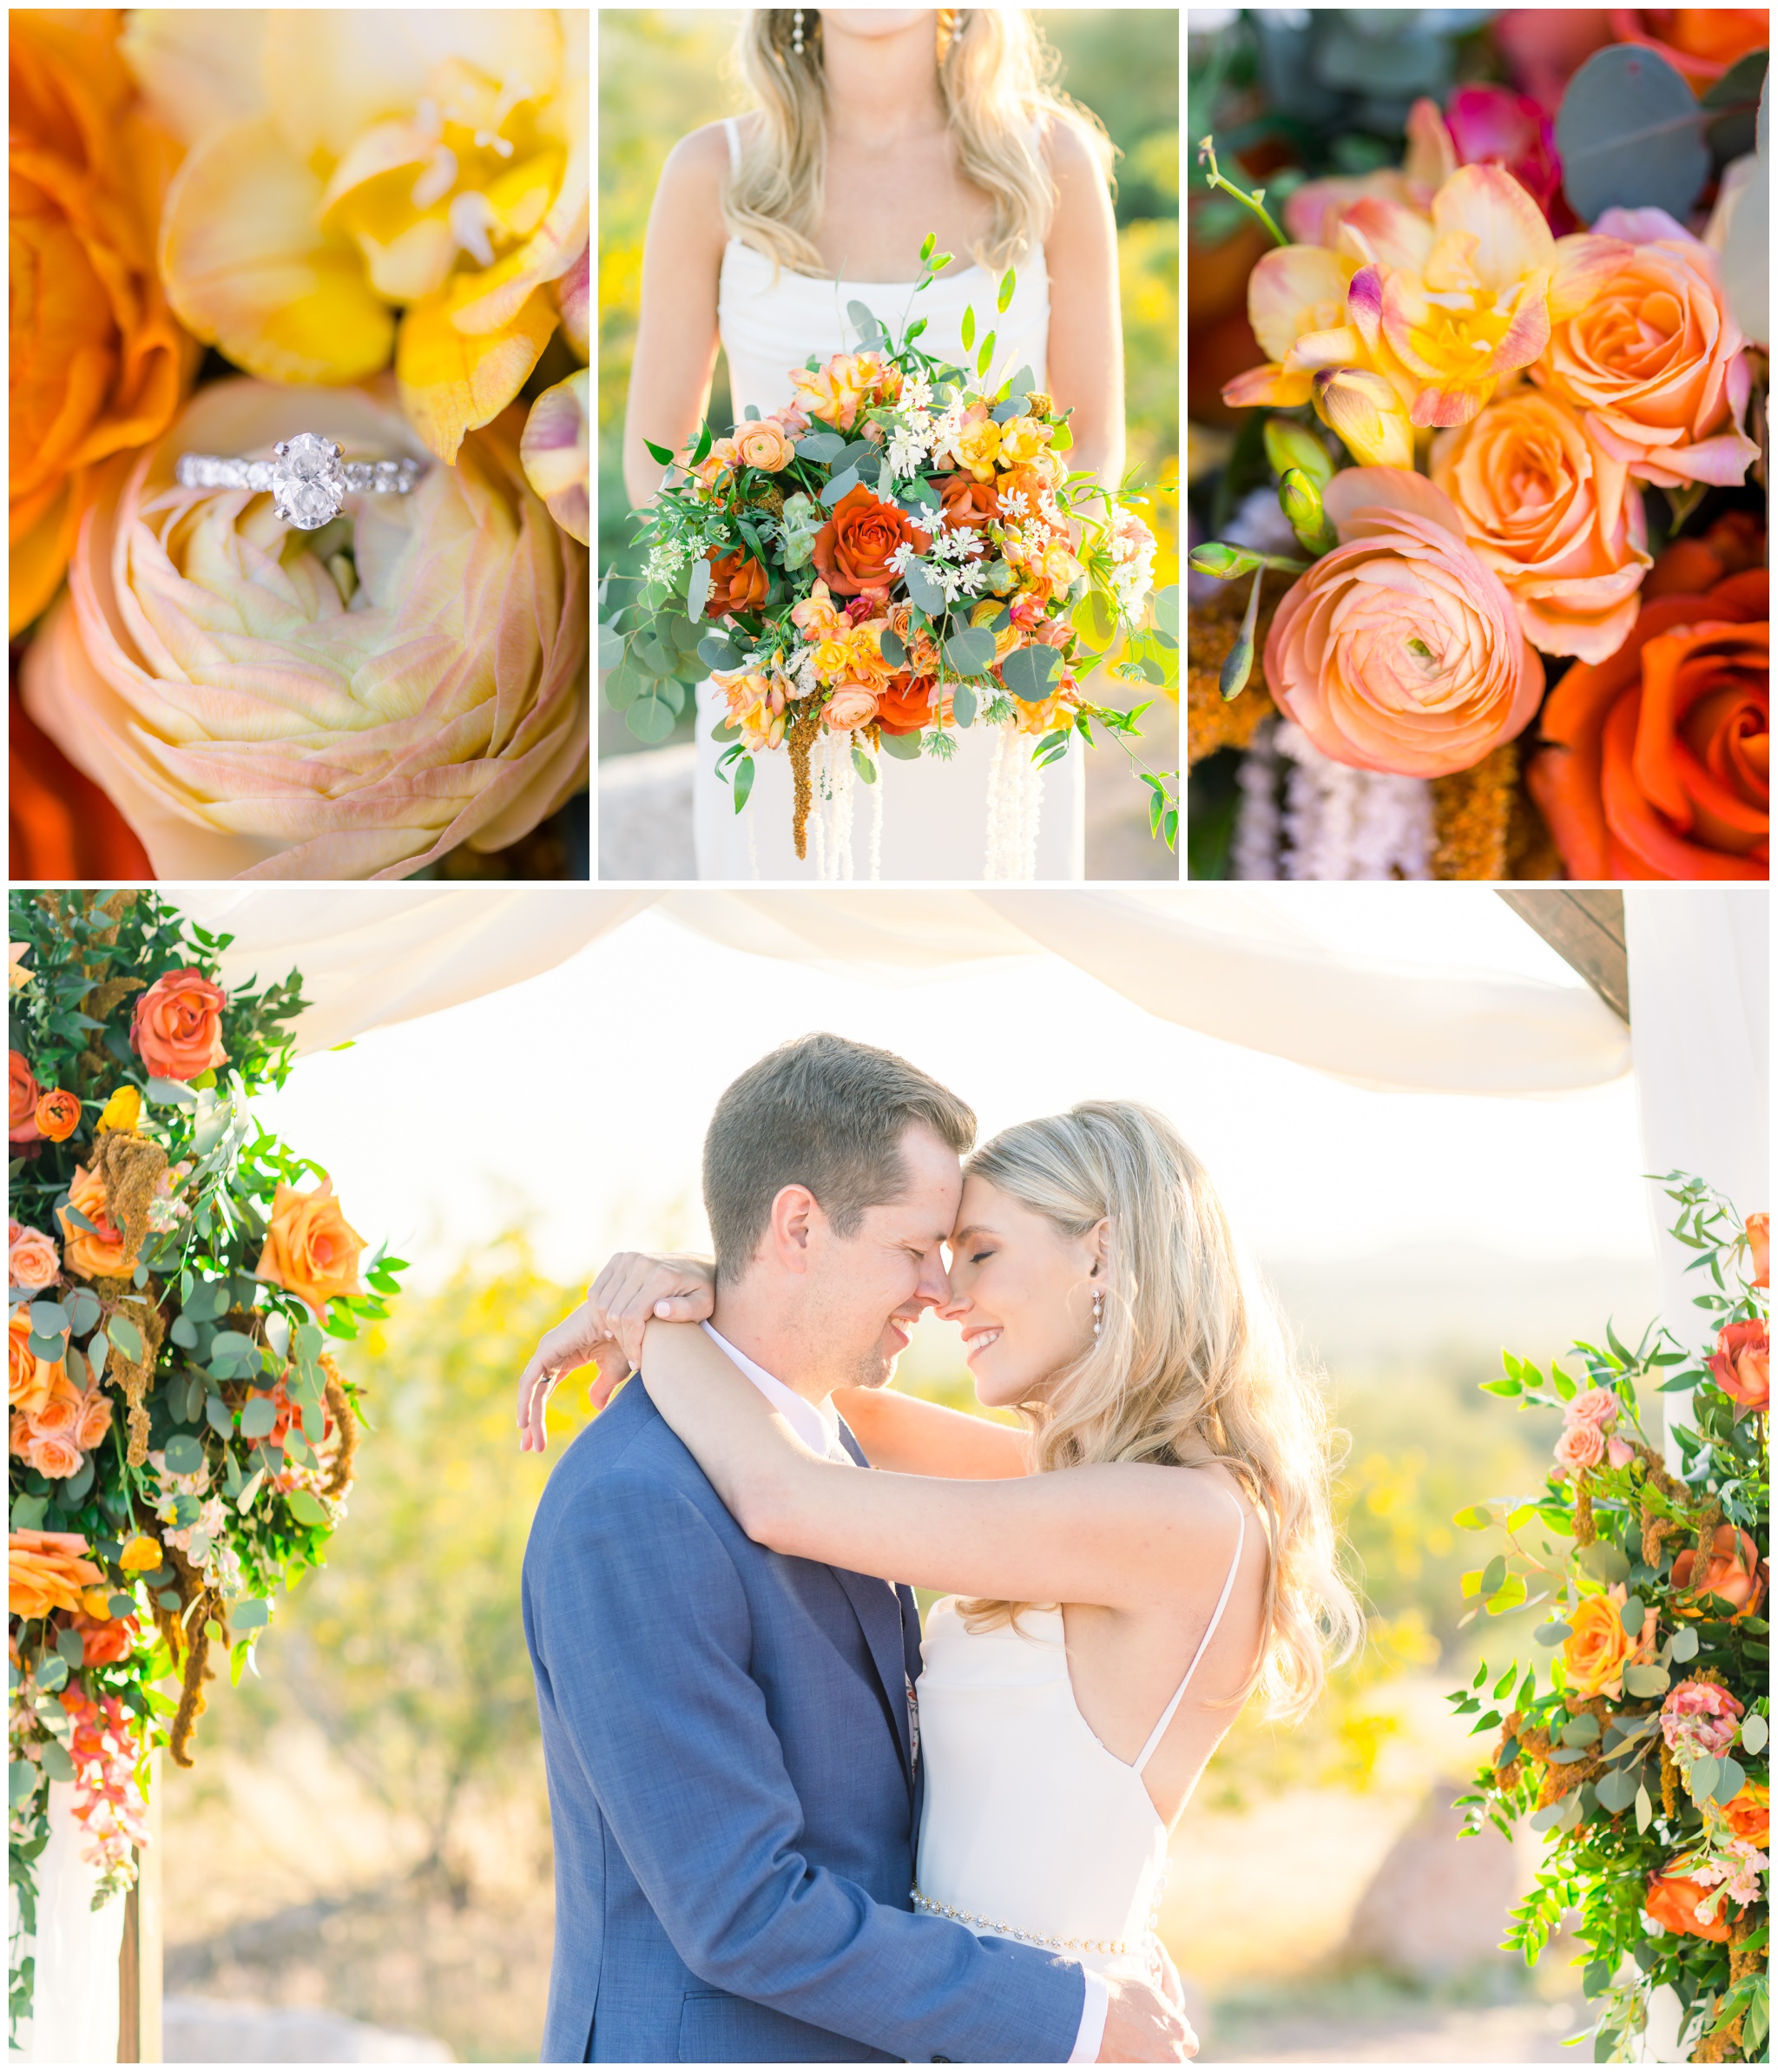 Engagement Ring on Blush floral, Bride holding colorful bouquet, Bride and Groom smiling, pink, blush, red and orange florals